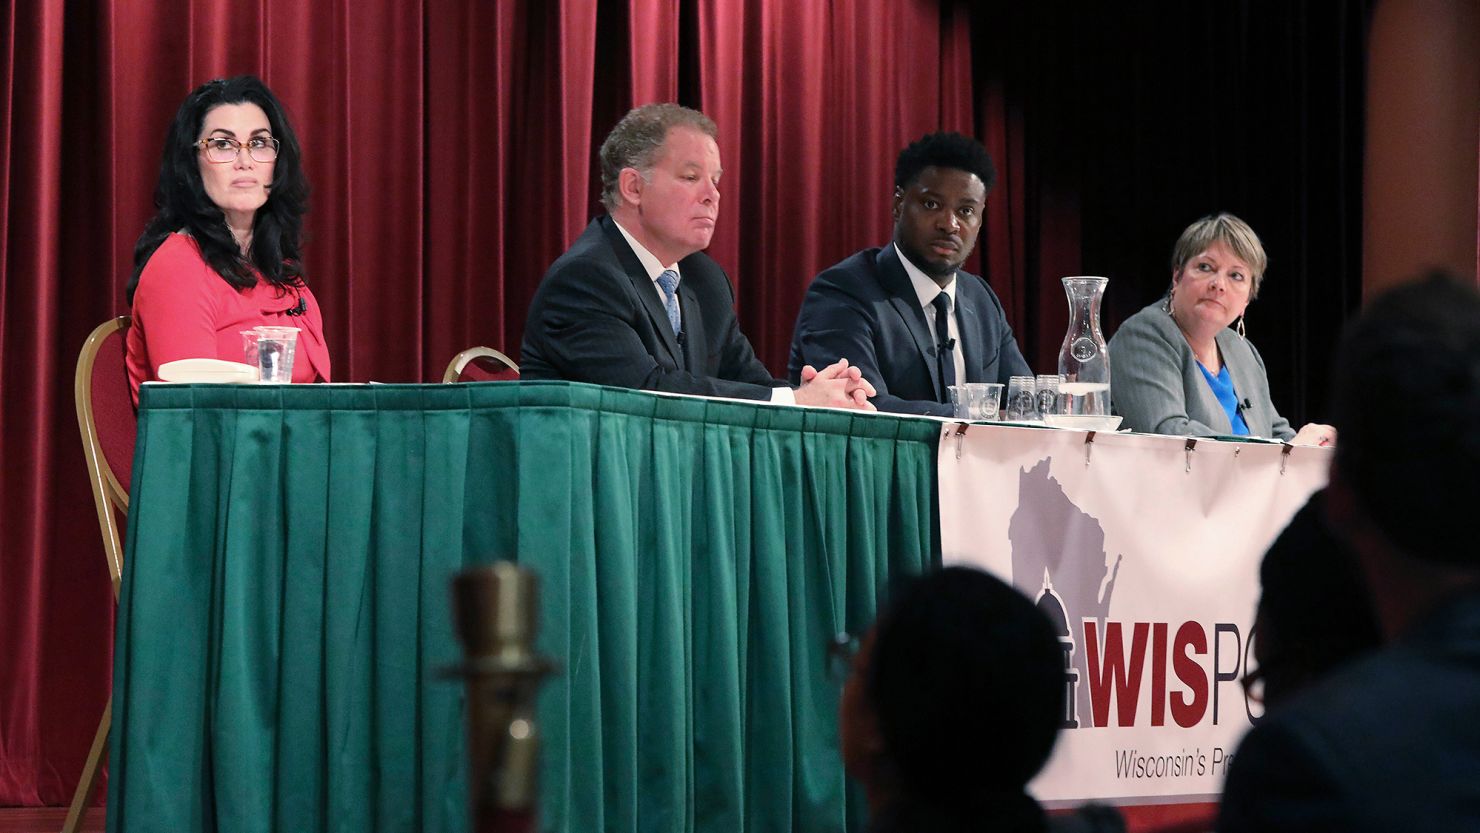 Wisconsin state Supreme Court candidates, from left, Jennifer Dorow, Dan Kelly, Everett Mitchell and Janet Protasiewicz participate in a candidate forum in Madison on January 9. 